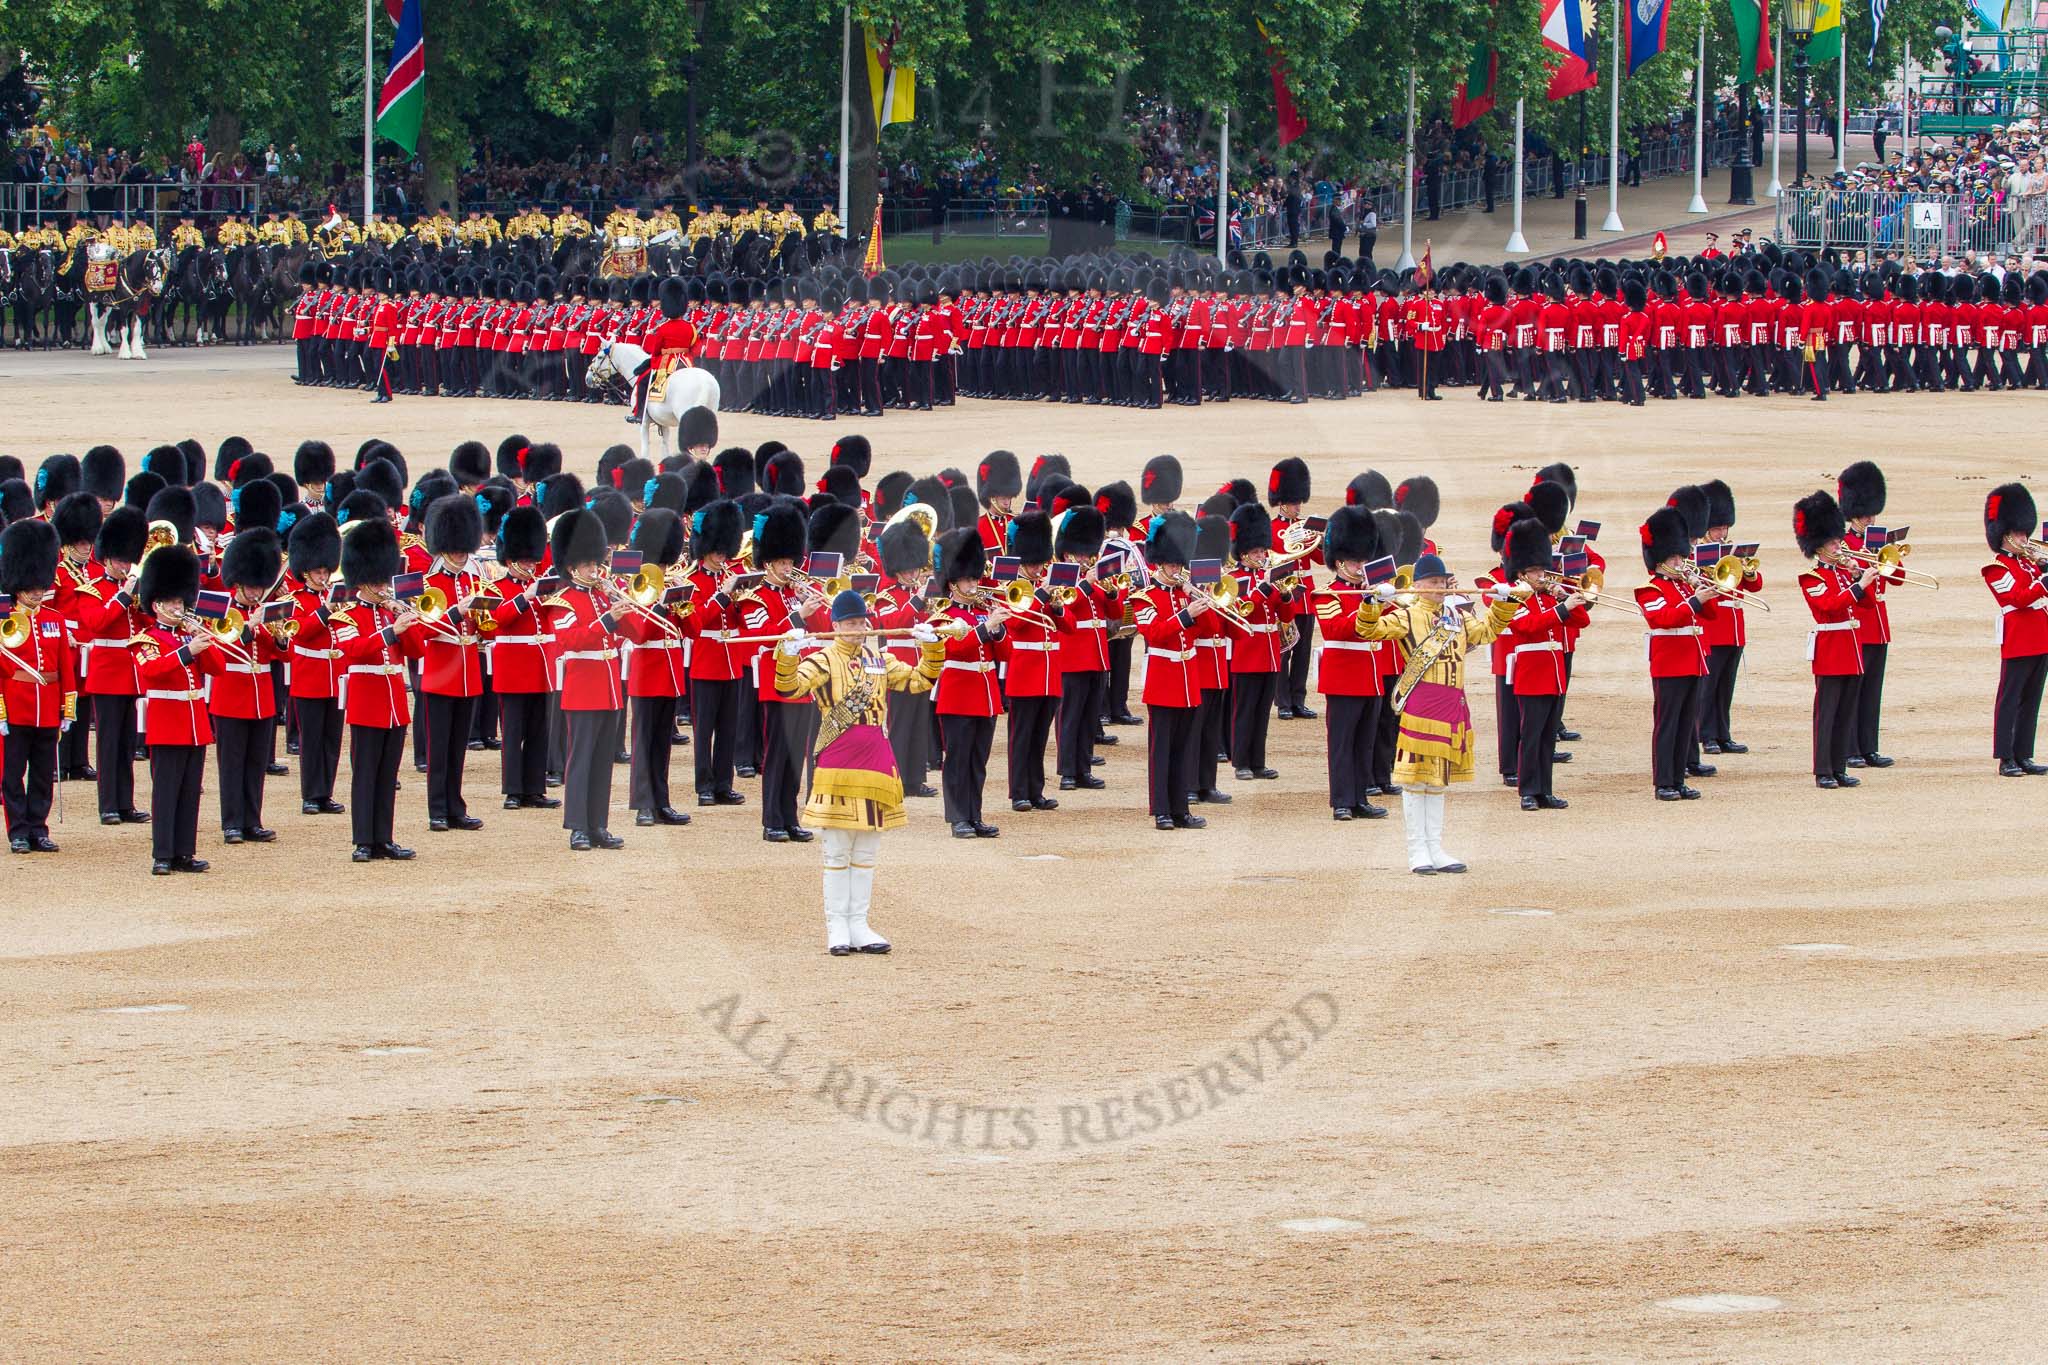 Trooping the Colour 2014.
Horse Guards Parade, Westminster,
London SW1A,

United Kingdom,
on 14 June 2014 at 11:43, image #668